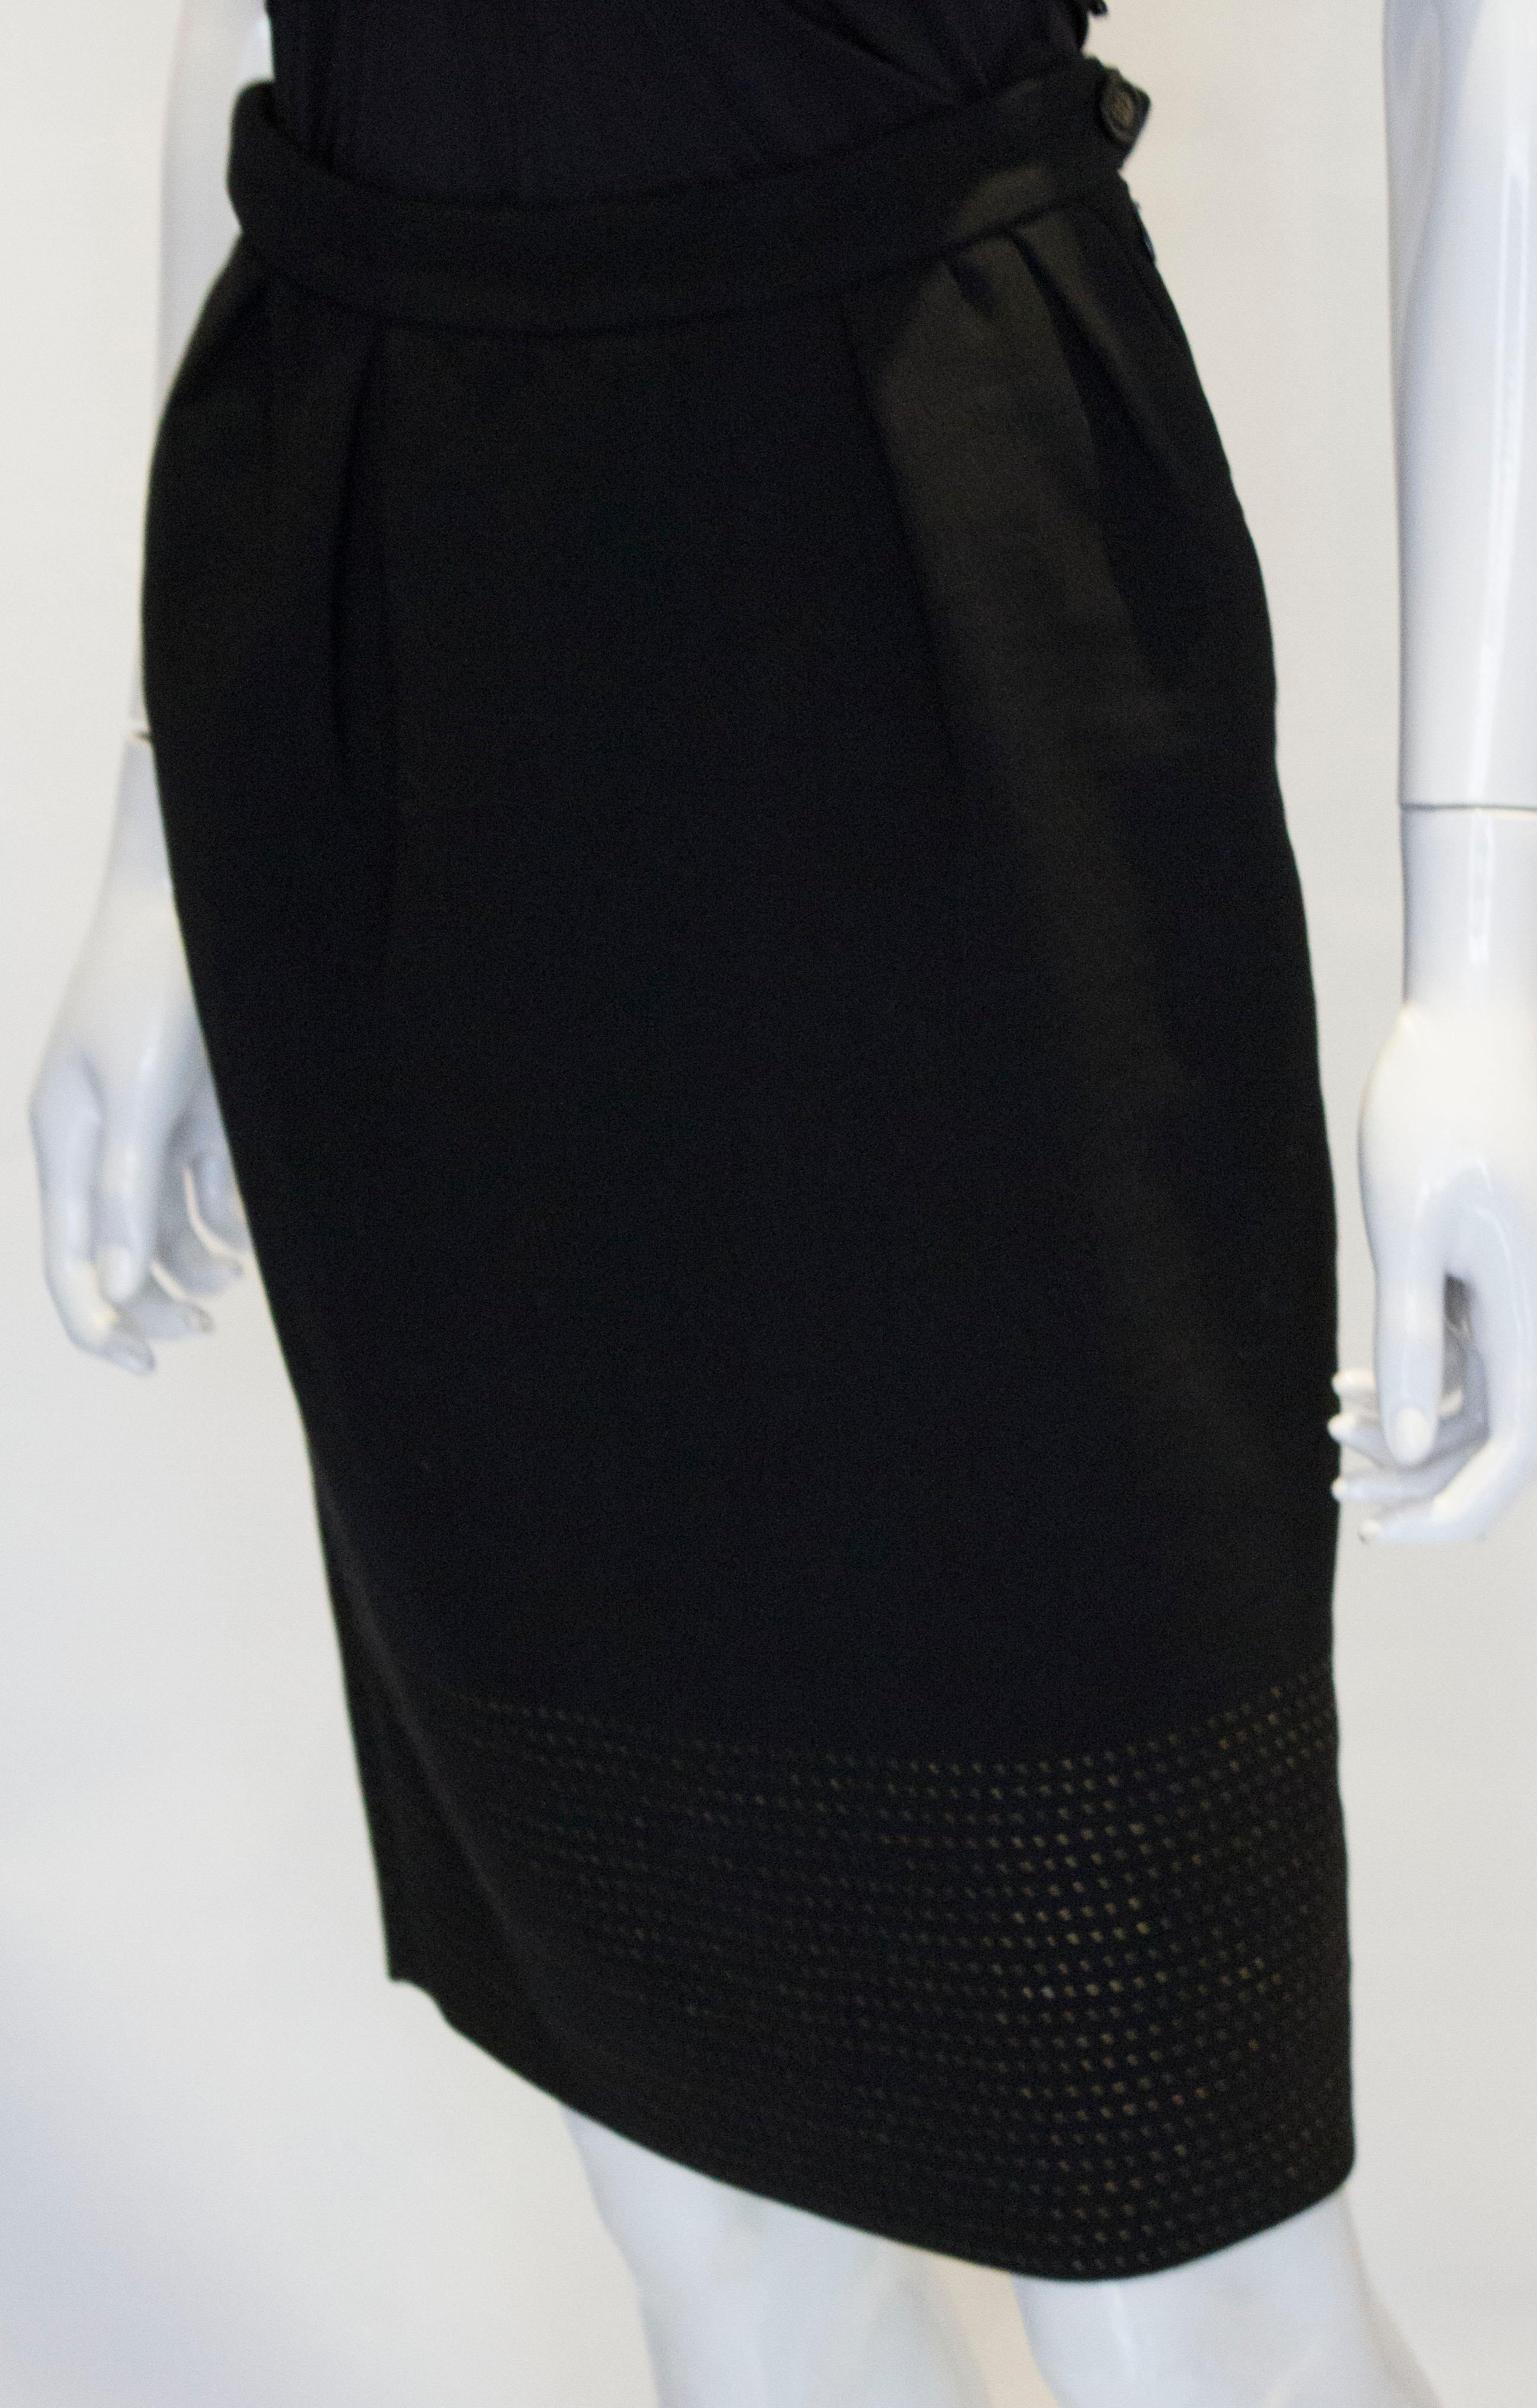  Vintage Yves Saint Laurent Rive Gauche Silk Skirt  In Good Condition For Sale In London, GB